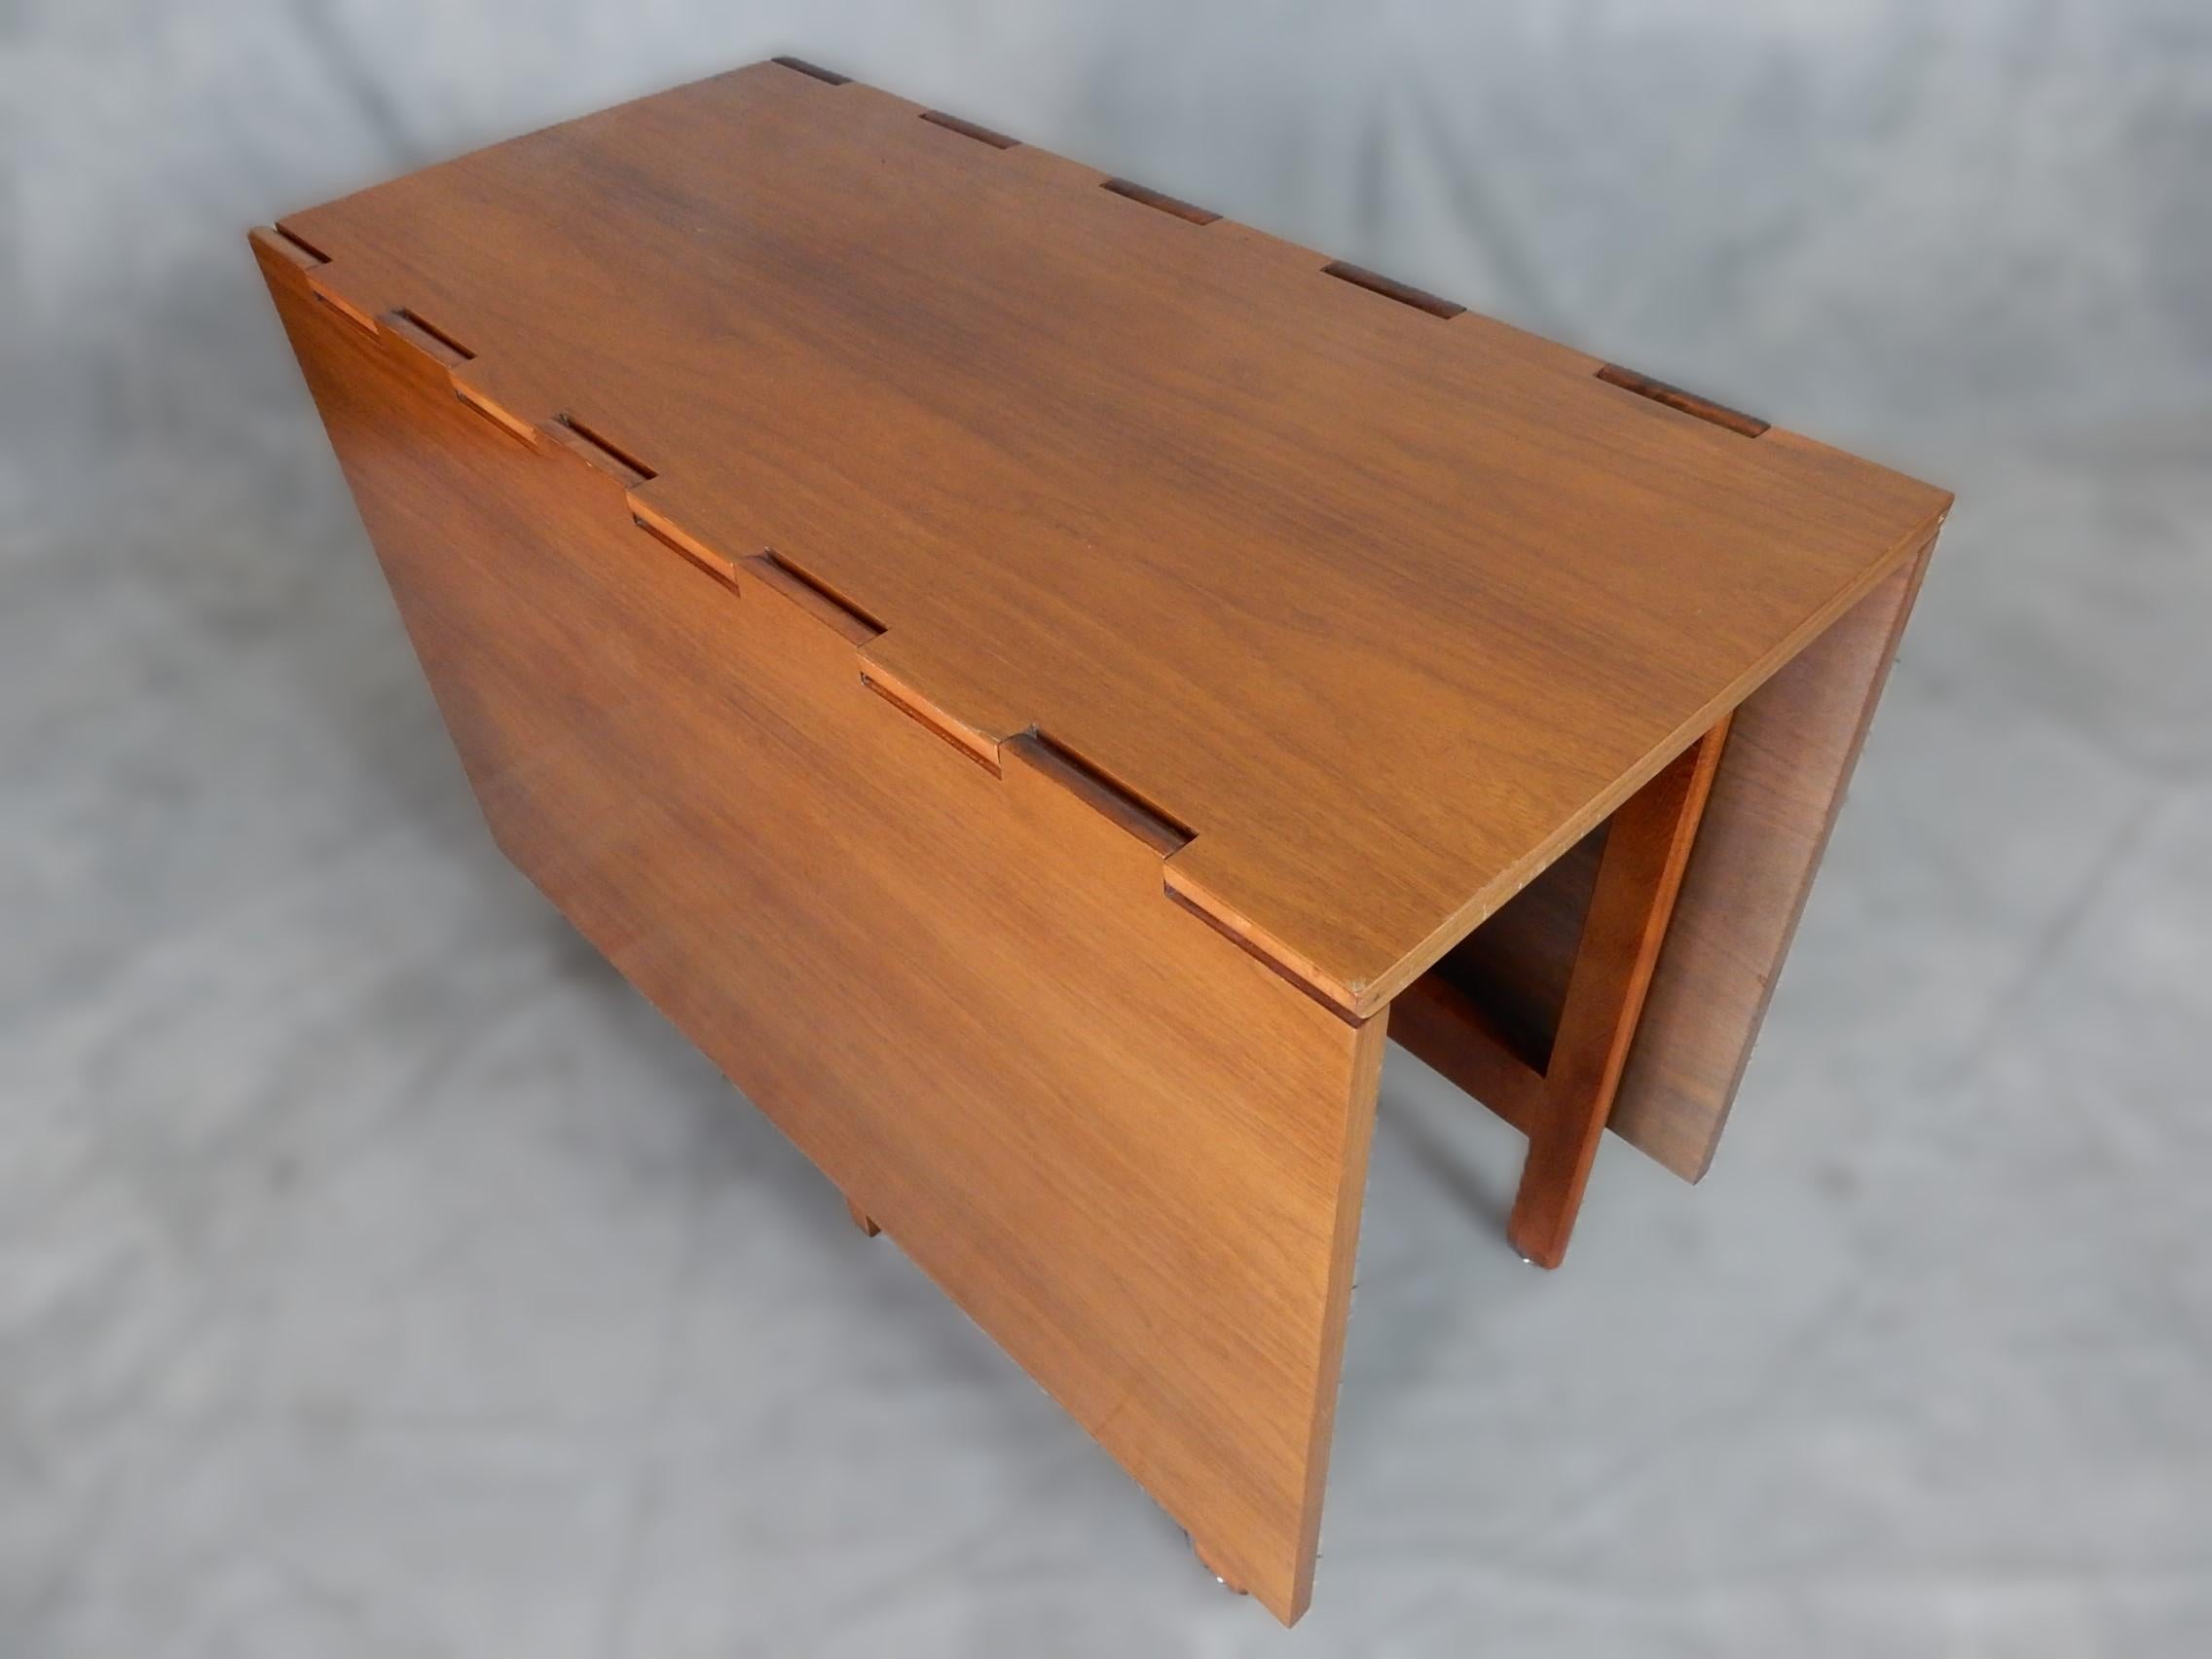 Iconic George Nelson design for Herman Miller gate leg table.
2 fold wide wood hinged tops with double gate legs.
The odd discoloration of one leaf appears to be an issue with the original finish. This does not affect use.
This table was always well